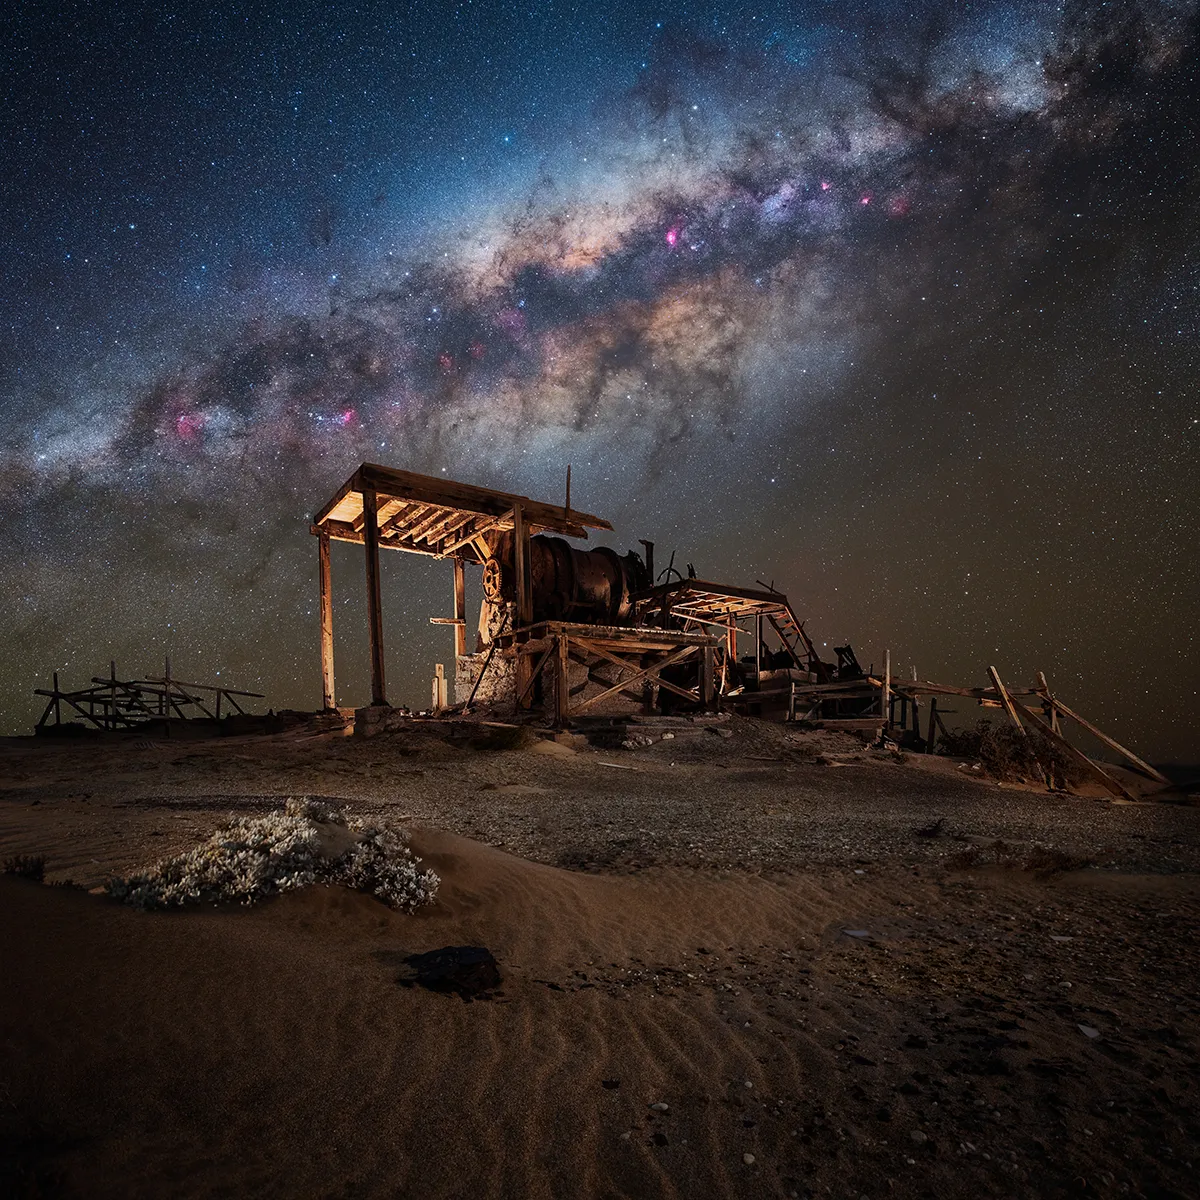 Sperrgebiet, by Vikas Chander, Bogenfels, Namib Desert, Namibia, Category: People & Space Equipment: Nikon D850 camera, 21 mm f/2.8, ISO 800, 30-second exposure